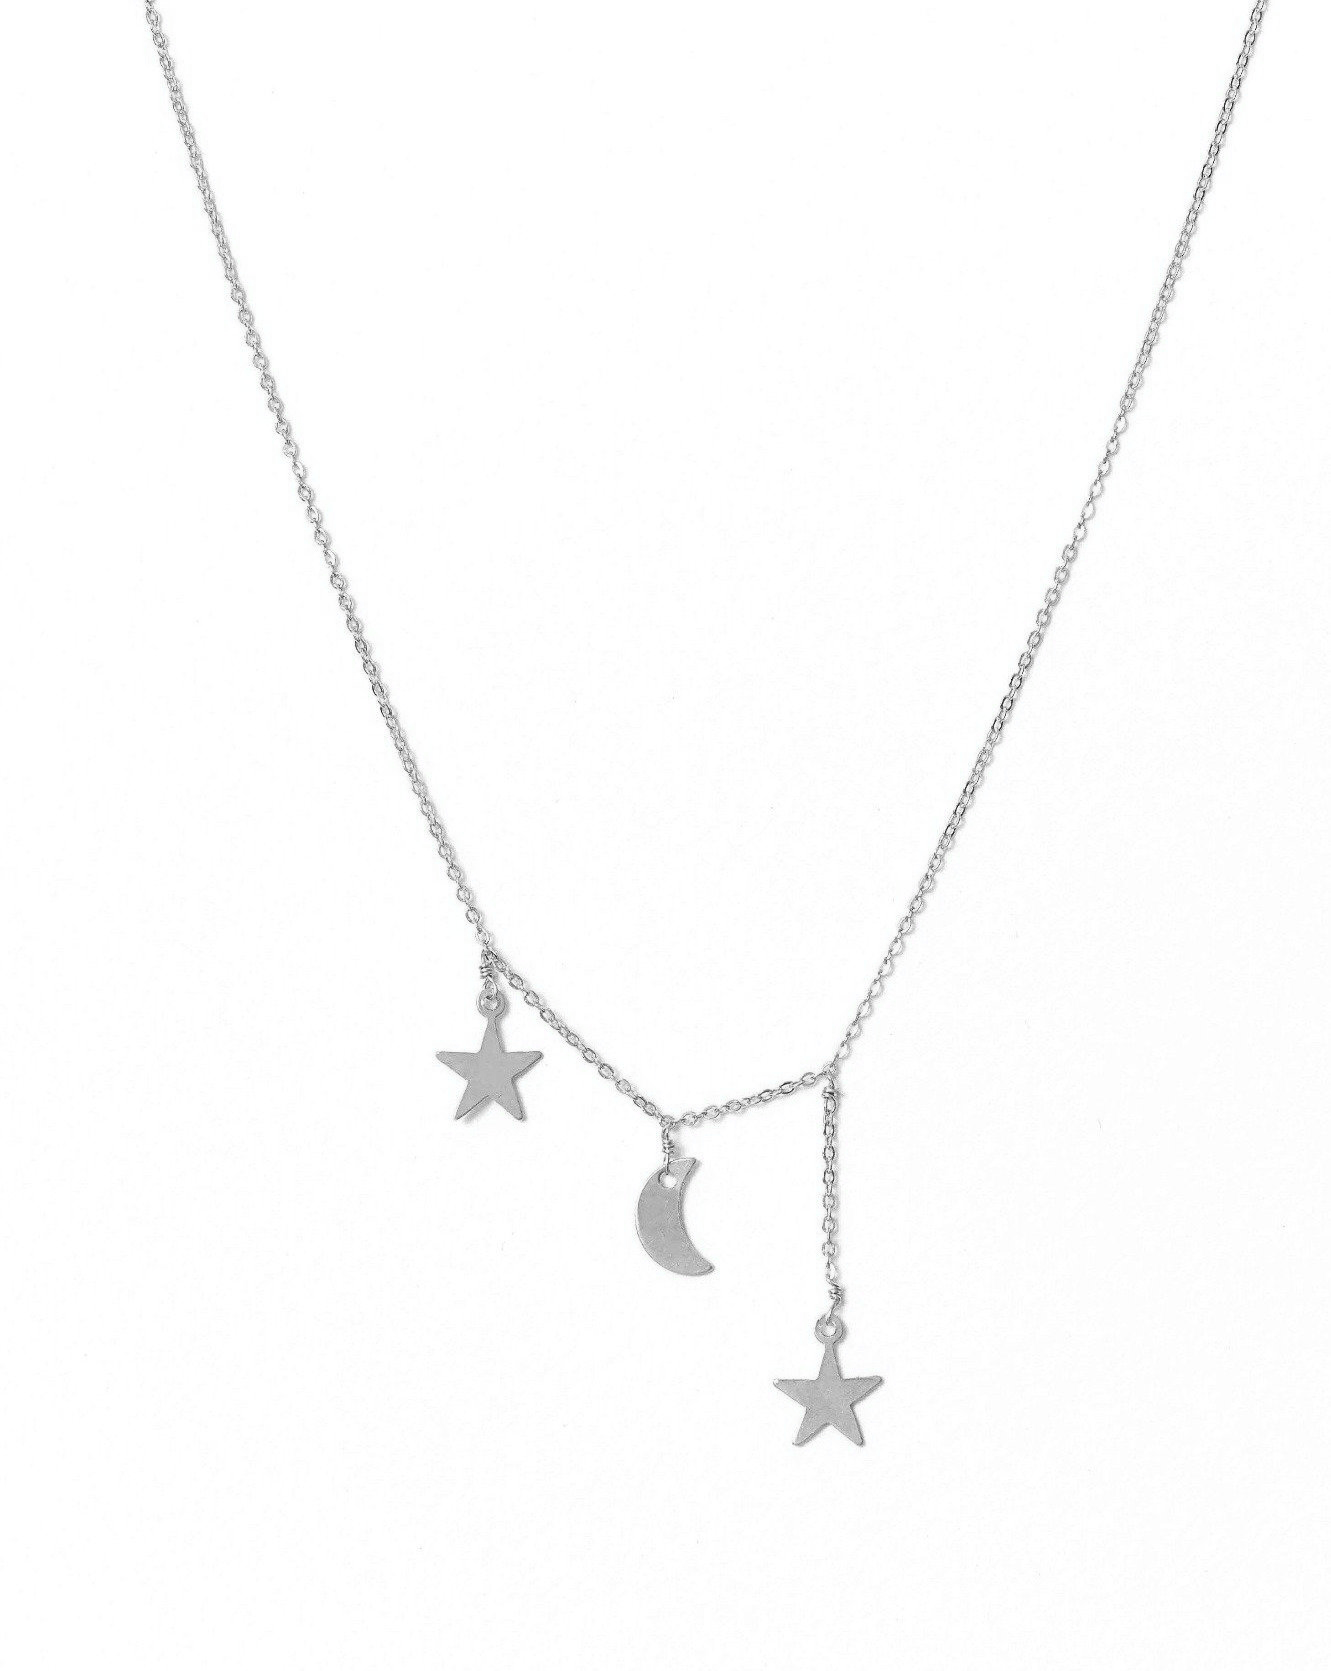 Filante Necklace by KOZAKH. A 16 to 18 inch adjustable length necklace in Sterling Silver, featuring moon and star charms with 1 star charm drop of about 0.5 inch. 